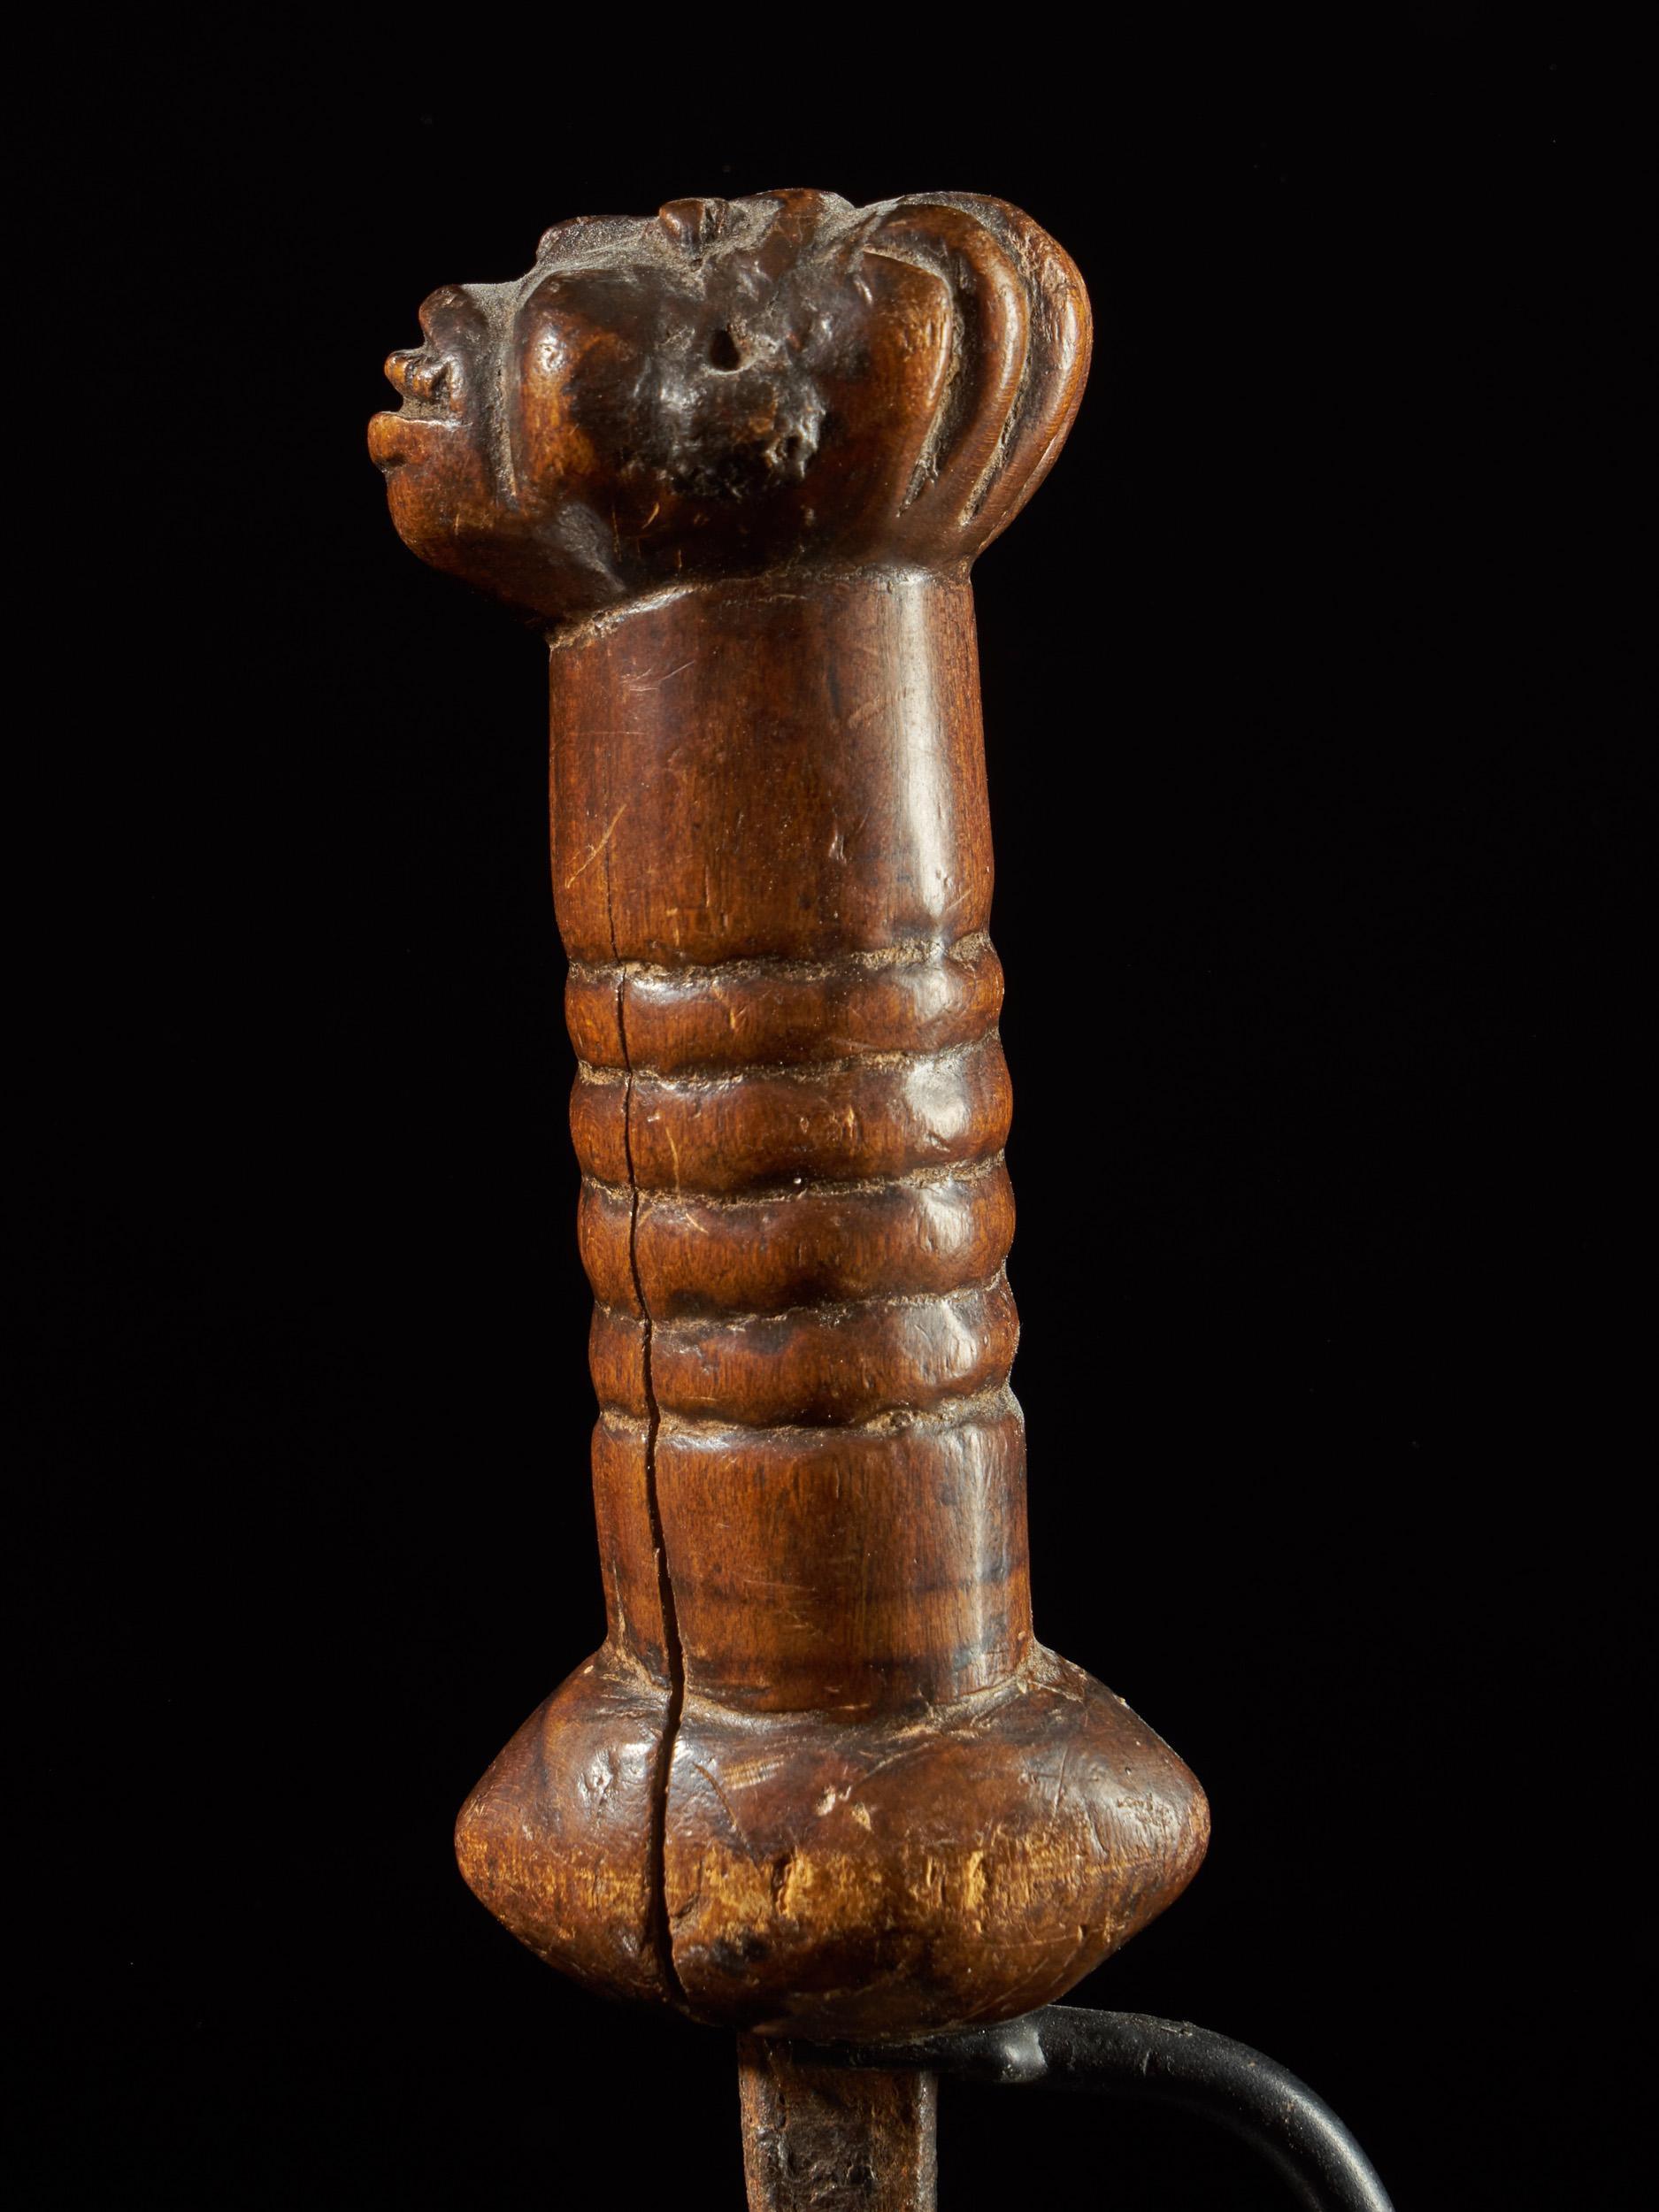 Hand-Crafted Bamileke People, Cameroon, Forged Knife with Carved Wooden Head